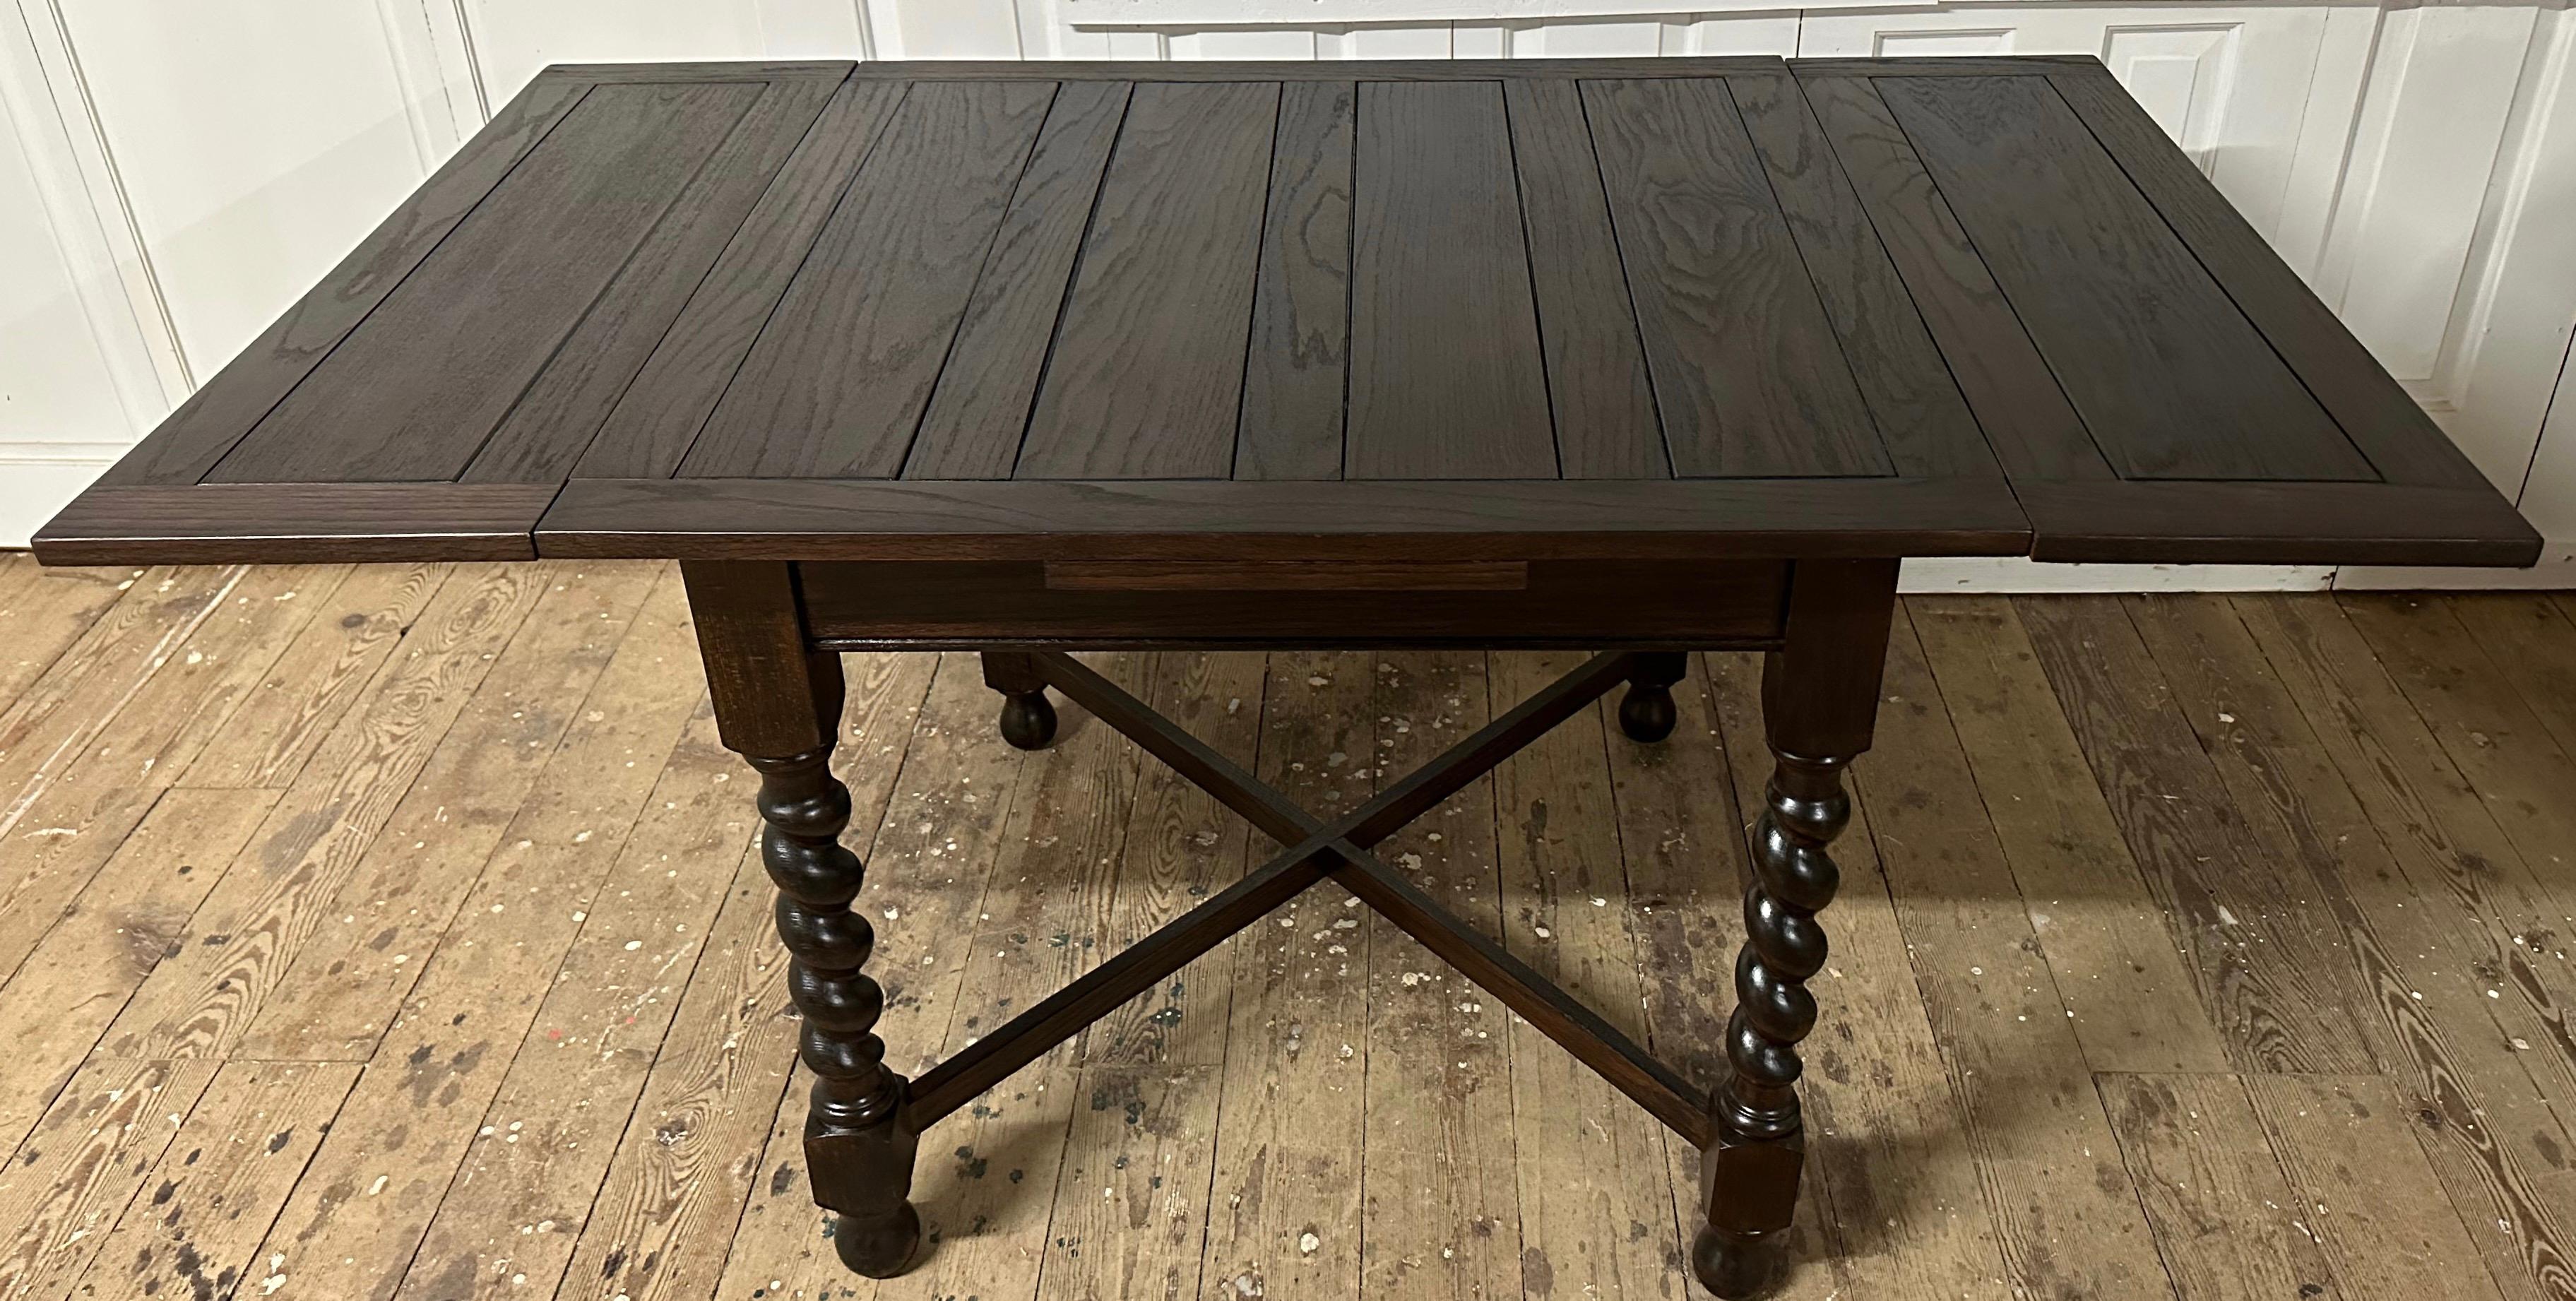 Antique French Louis XIII Style Draw Leaf Dining Table with Barley Twist Legs For Sale 4